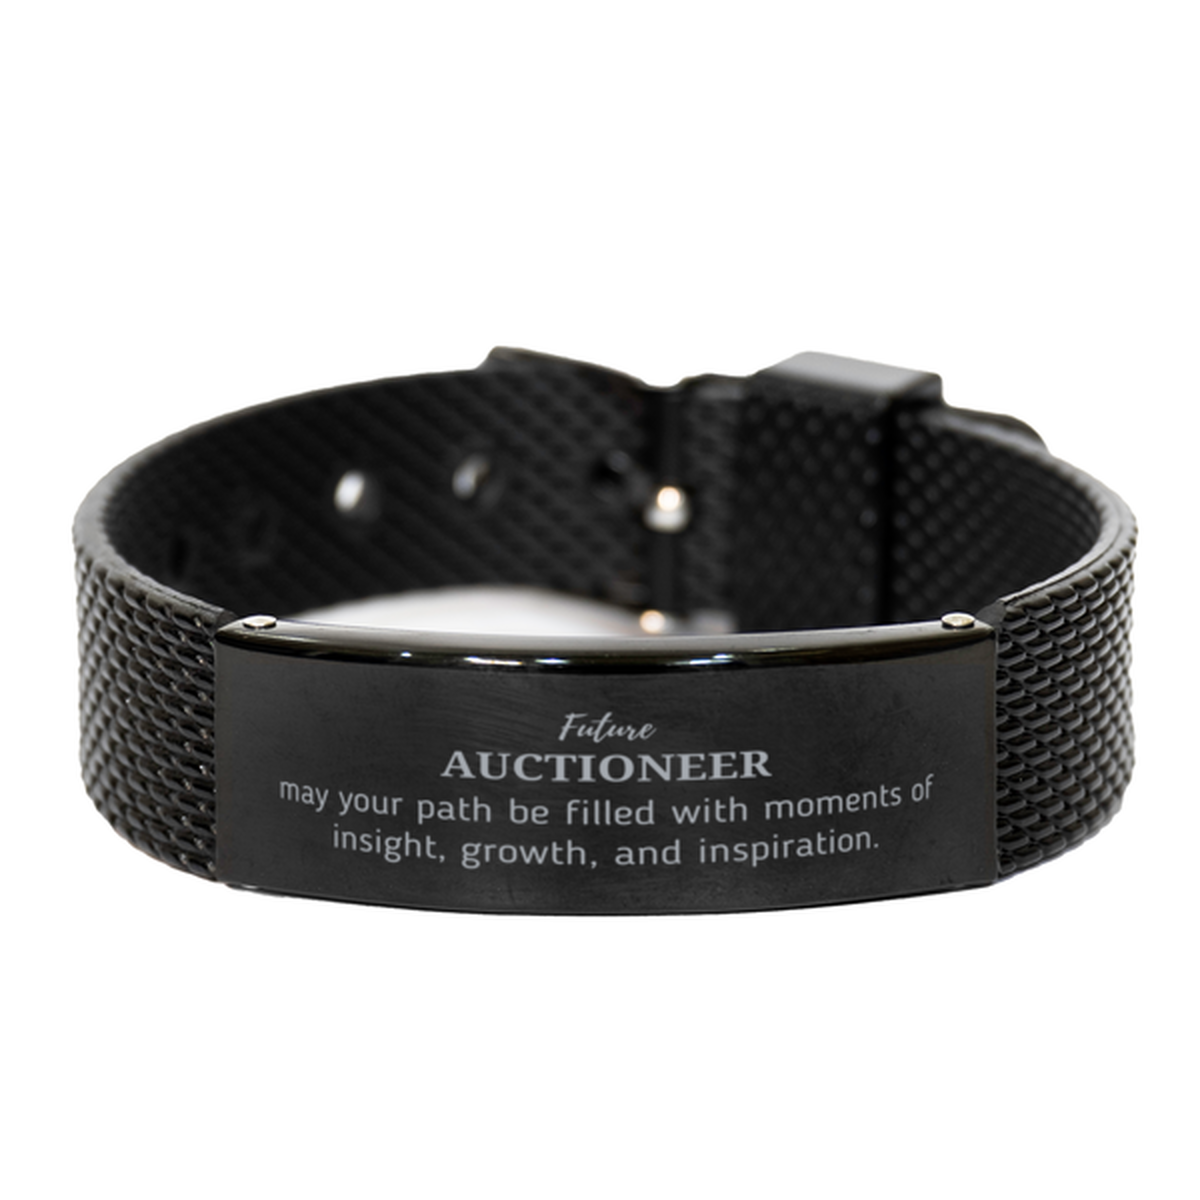 Future Auctioneer Gifts, May your path be filled with moments of insight, Graduation Gifts for New Auctioneer, Christmas Unique Black Shark Mesh Bracelet For Men, Women, Friends